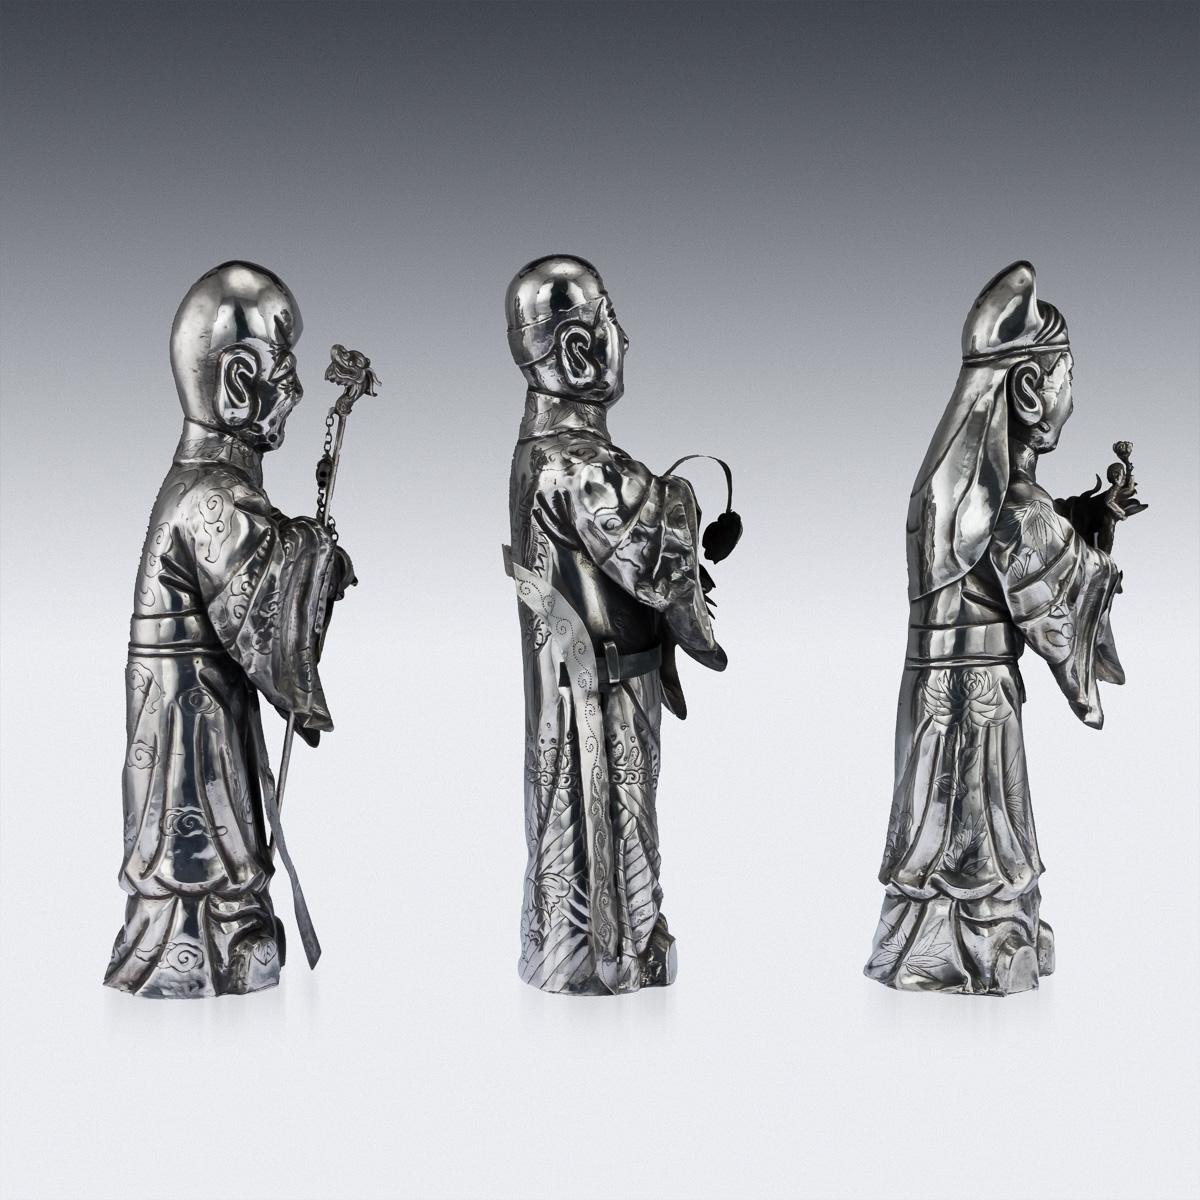 Chinese Export 19th Century Chinese Solid Silver Set of Three Immortal Figures, circa 1880